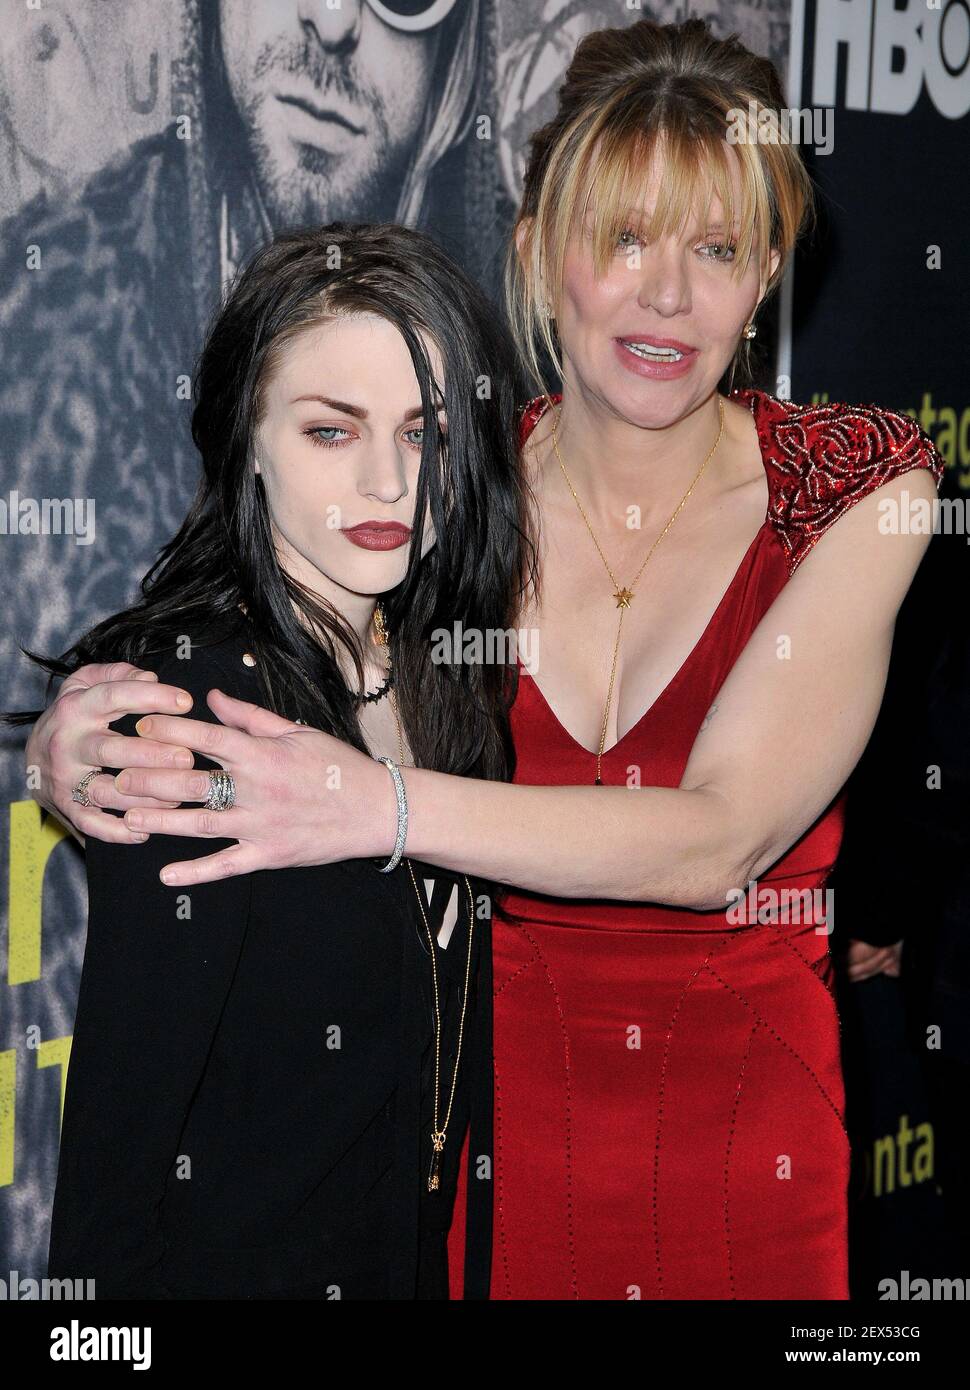 (L-R) Frances Bean Cobain and Courtney Love arrives at the HBO Documentary Films' "Kurt Cobain: Montage Of Heck" Los Angeles Premiere held at the Egyptian Theatre in Hollywood, CA on Tuesday, April 21, 2015. (Photo By Sthanlee B. Mirador) *** Please Use Credit from Credit Field *** Stock Photo